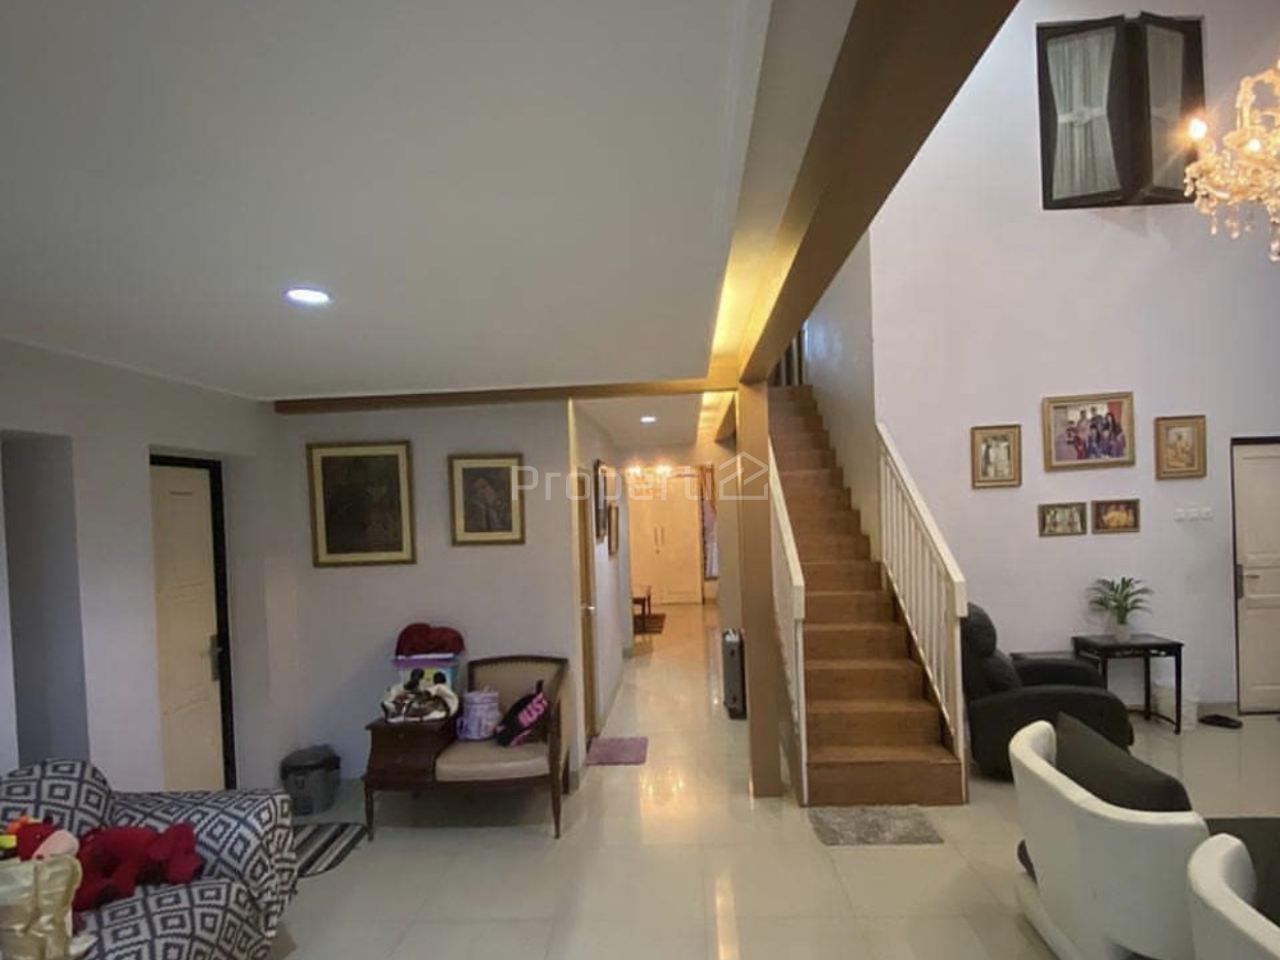 Exclusive House at Cipete, South Jakarta, Jakarta Selatan